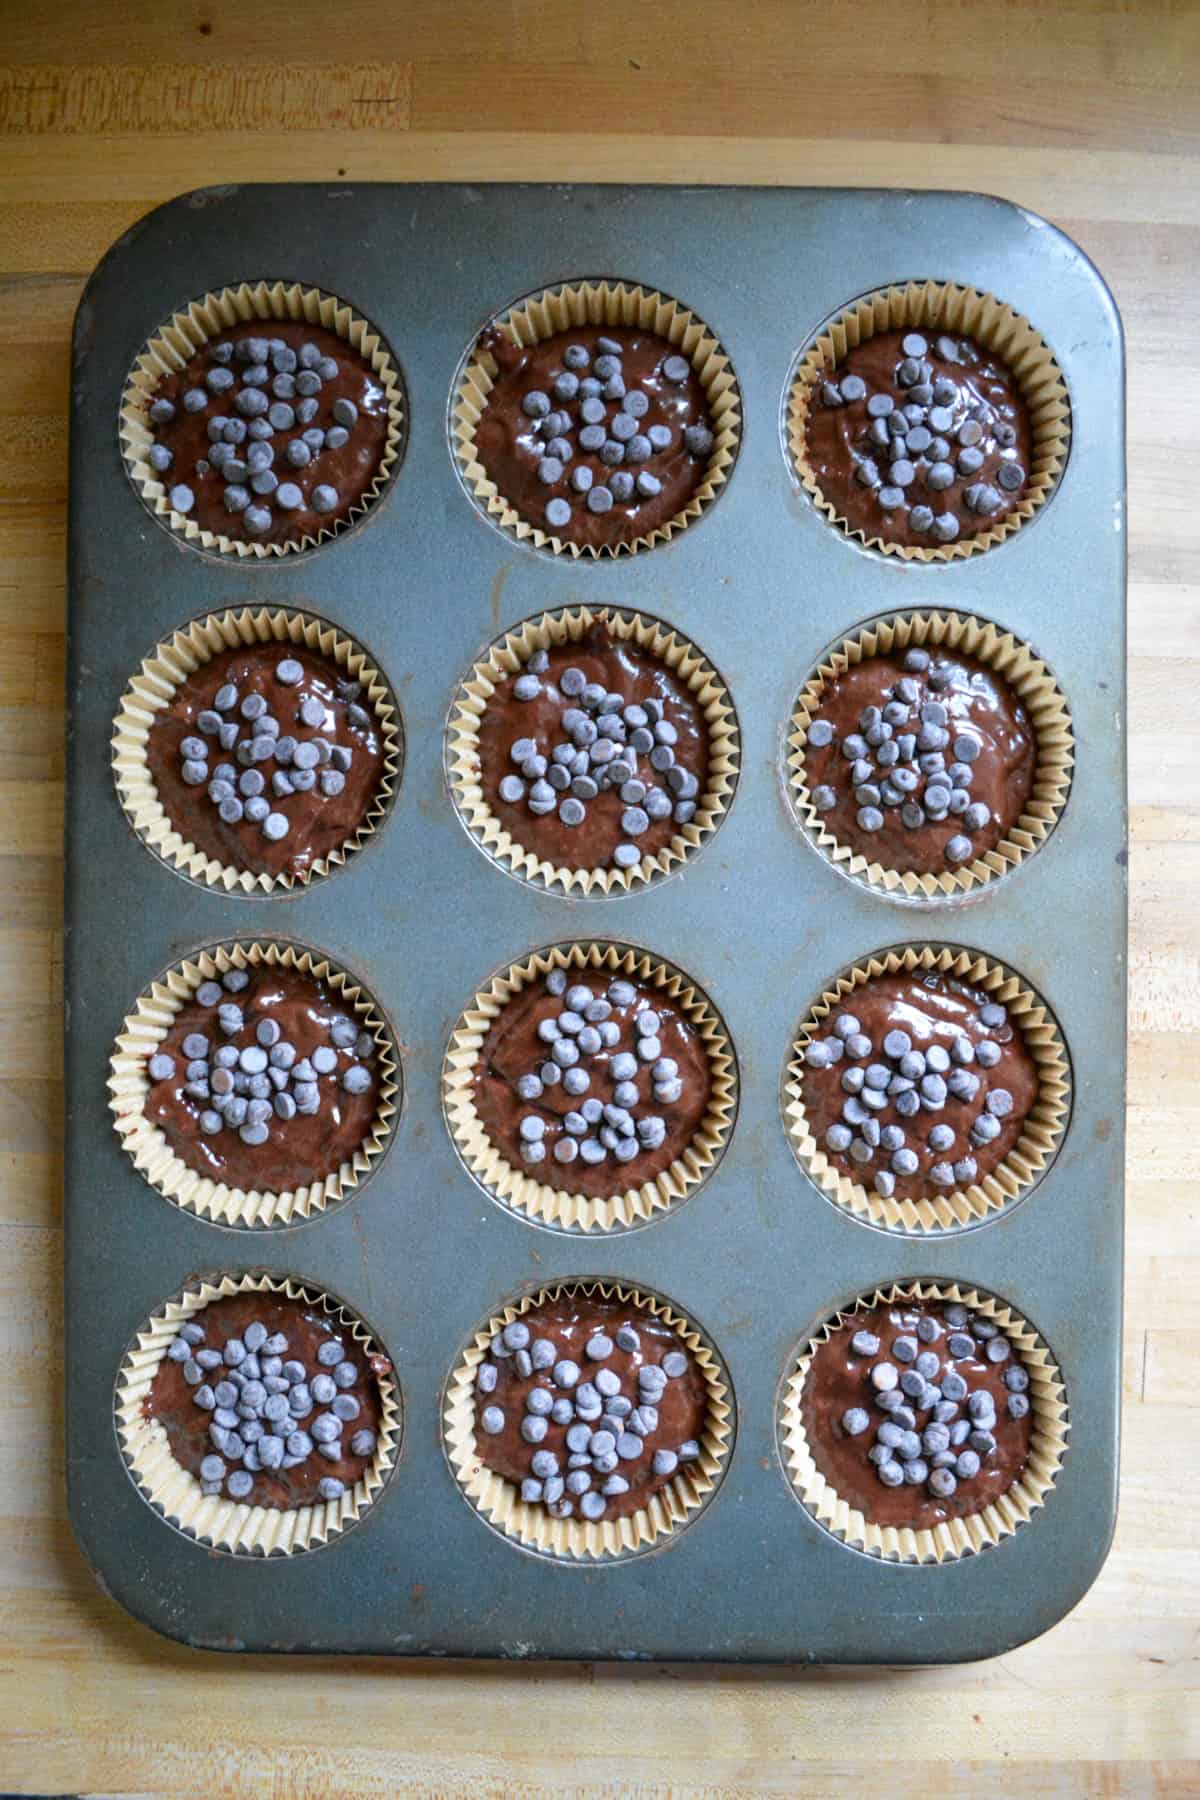 Vegan Double Chocolate Banana Bread Muffin batter scooped into a muffin pan.